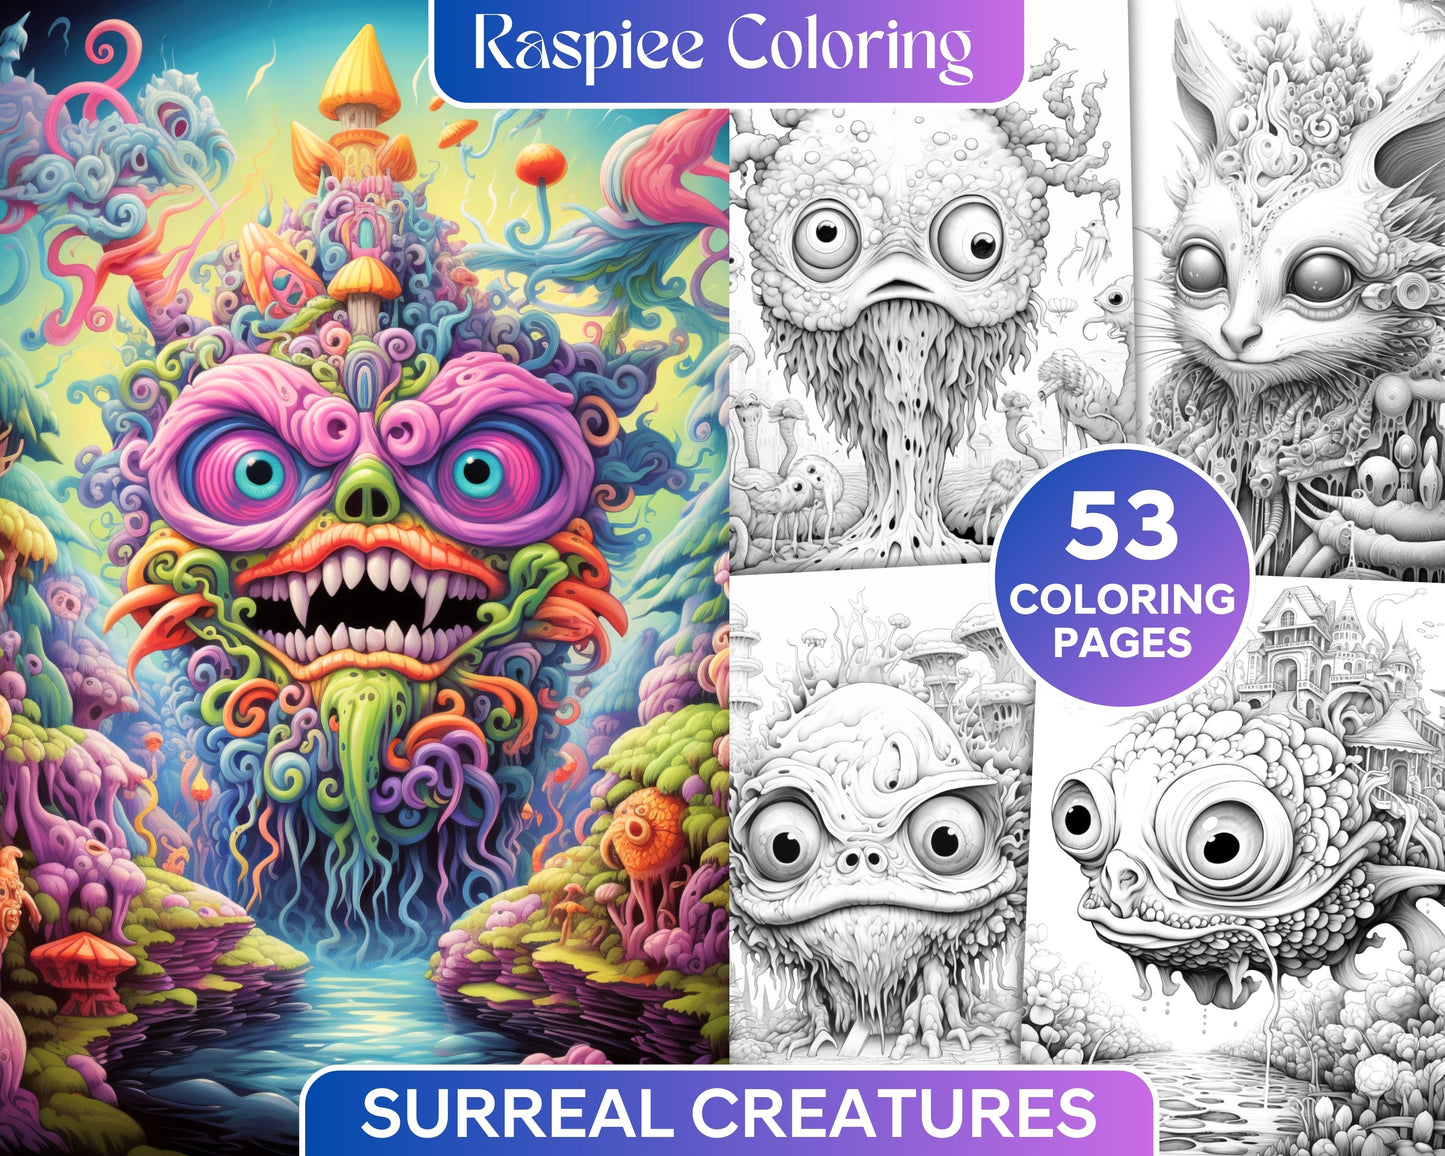 Grayscale coloring page of a surreal creature with intricate details, Fantasy grayscale coloring illustration for stress relief, Printable adult coloring image of whimsical animal in grayscale style, Detailed grayscale art of a mystical creature for DIY coloring